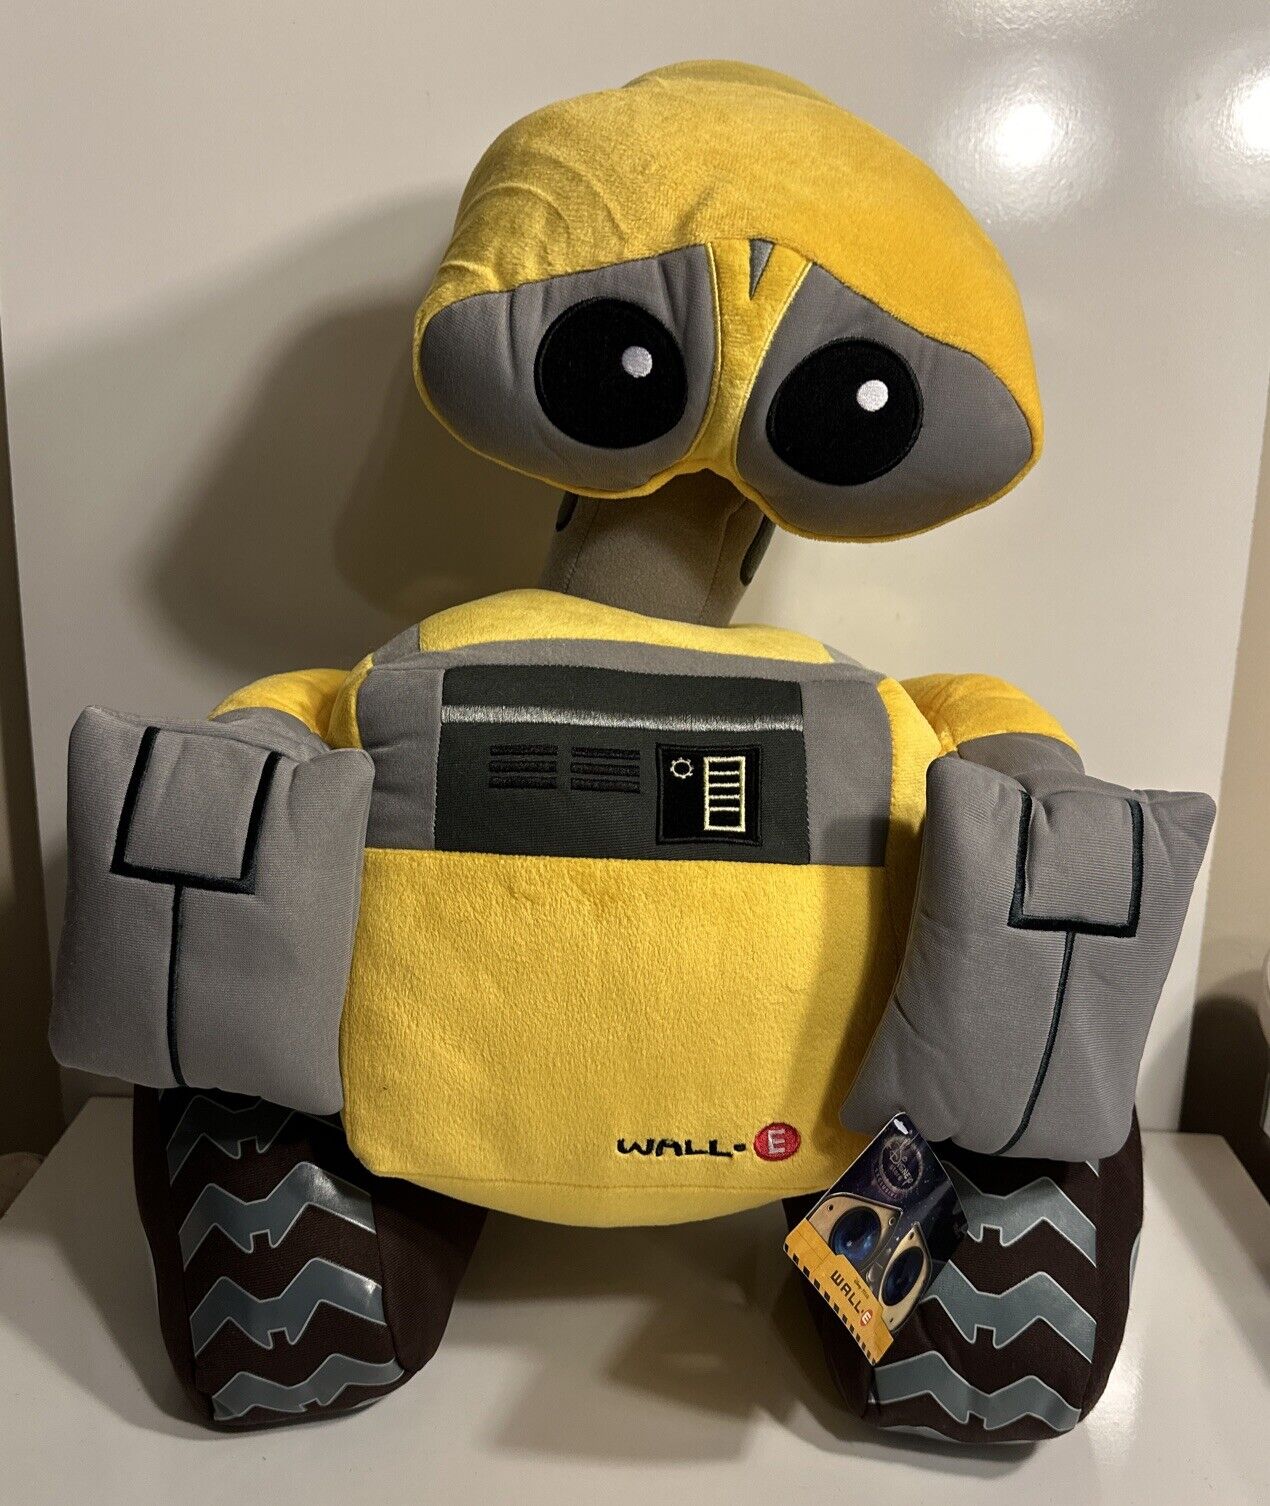 Official Disney Store Exclusive Stamped Large Wall-E Soft Plush Toy Wall E